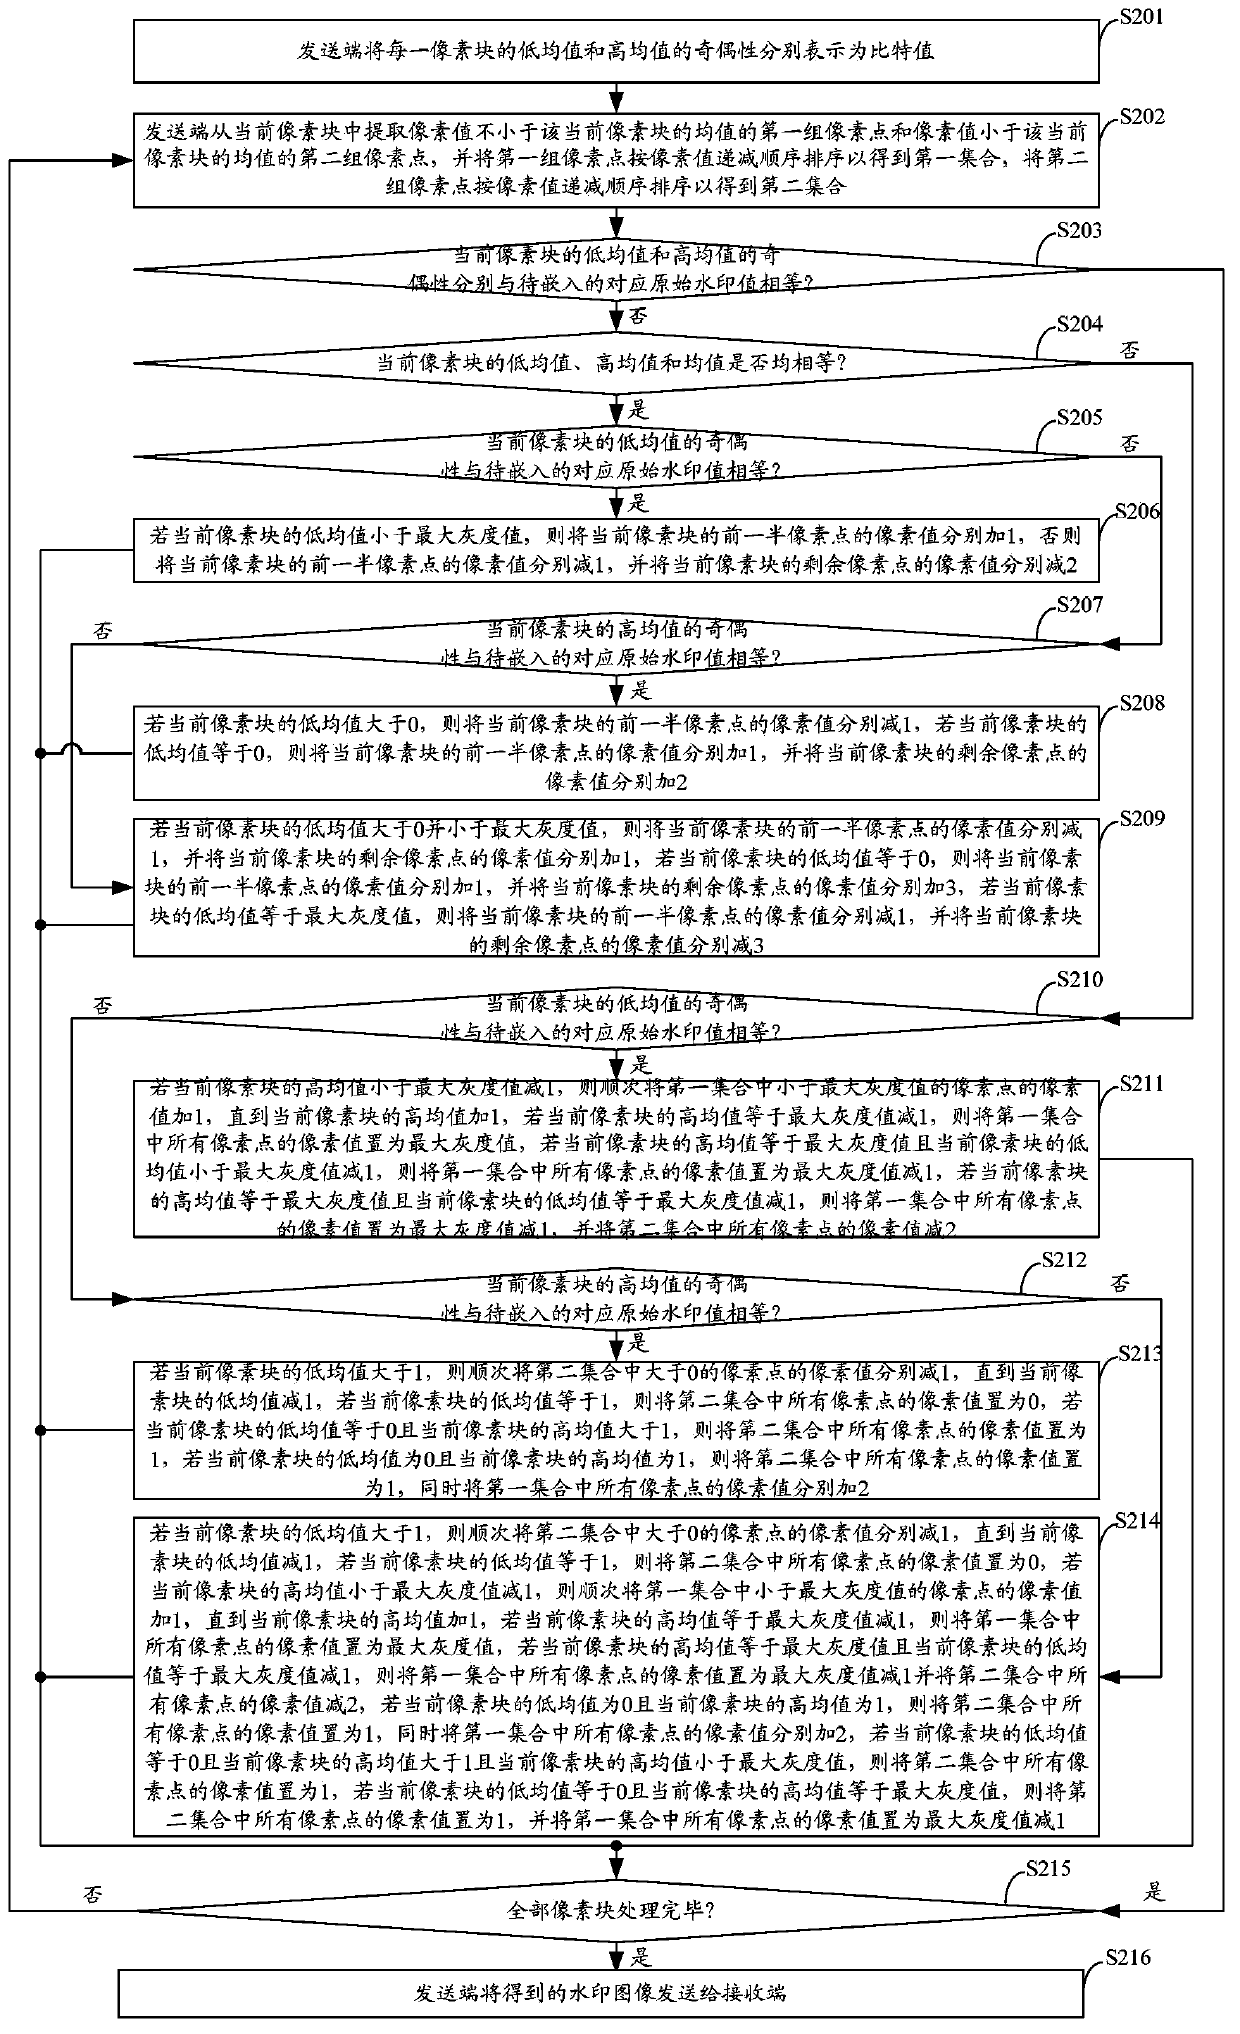 Method and system for authenticating image contents